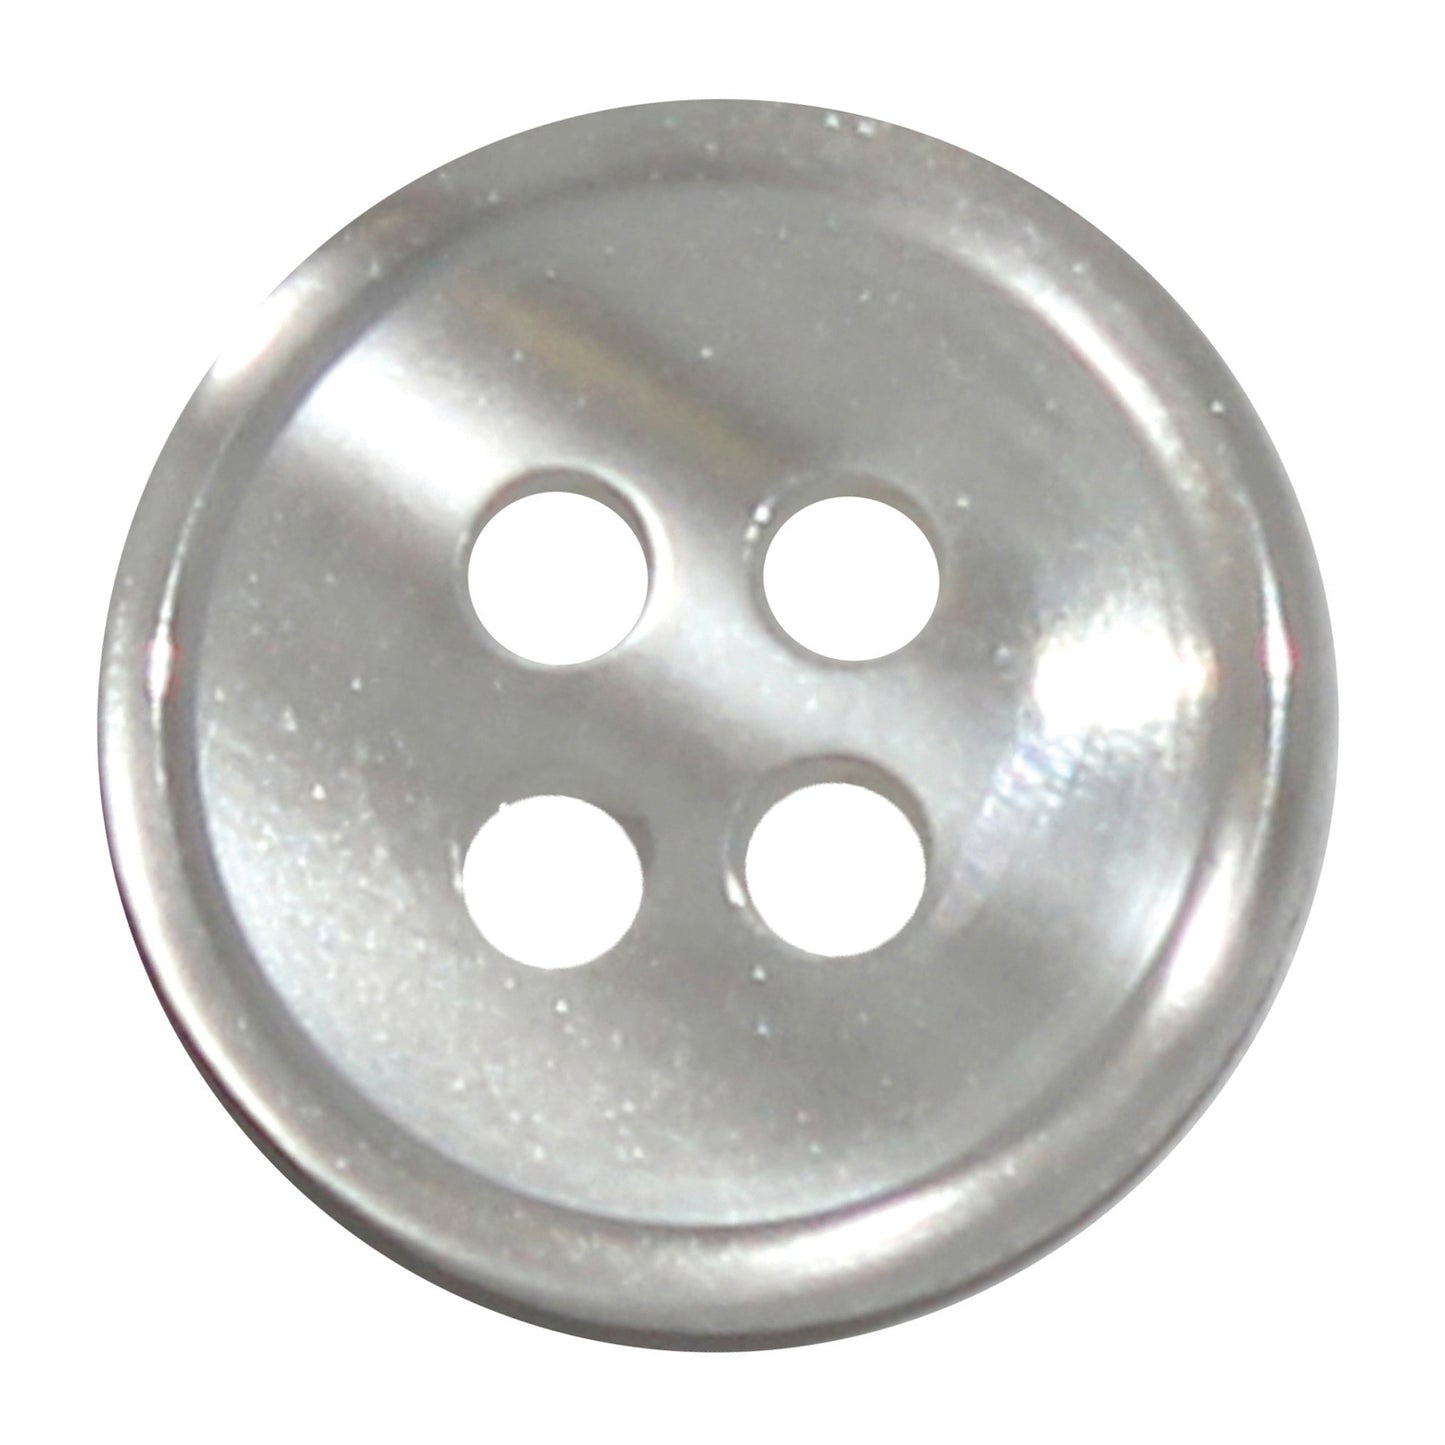 4 Hole Button - 13mm - Pearl White [LF17.7]